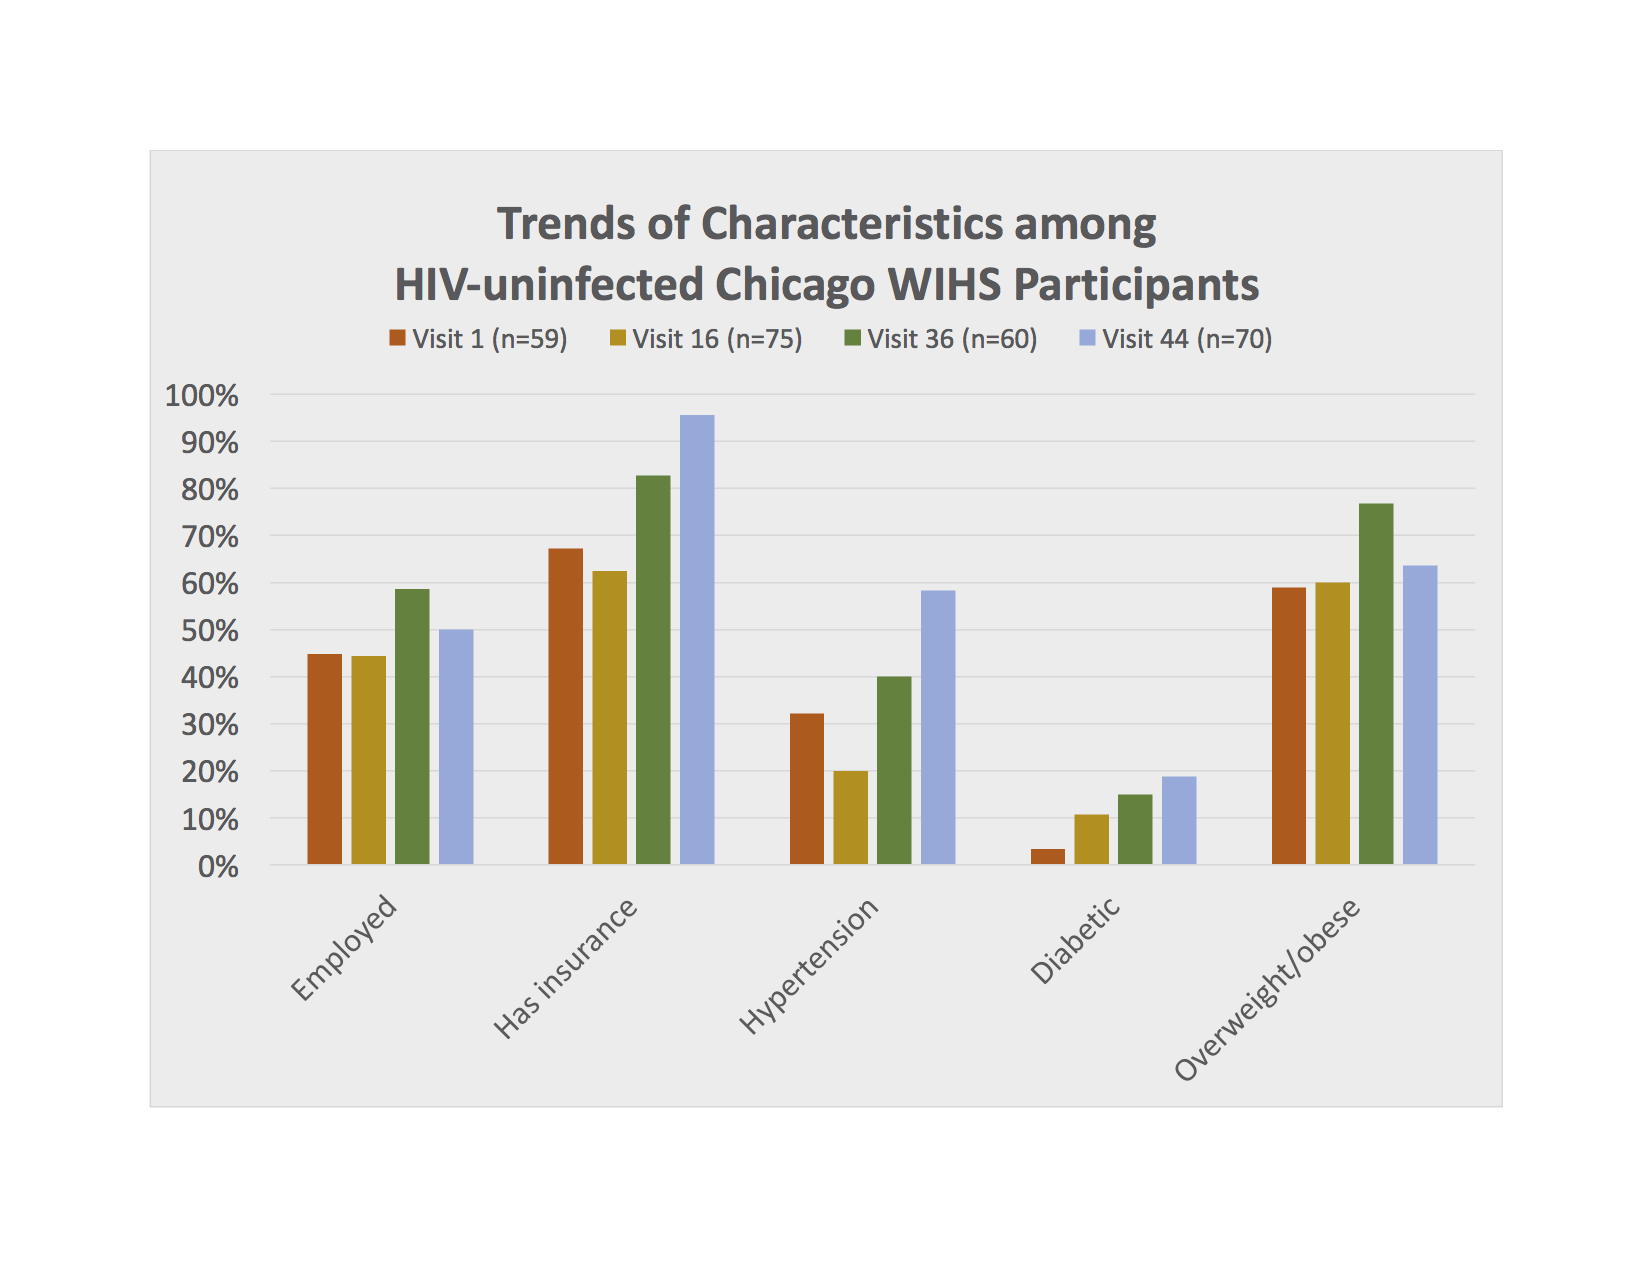 Trends of Characteristics Among HIV-uninfected Chicago WIHS Participants